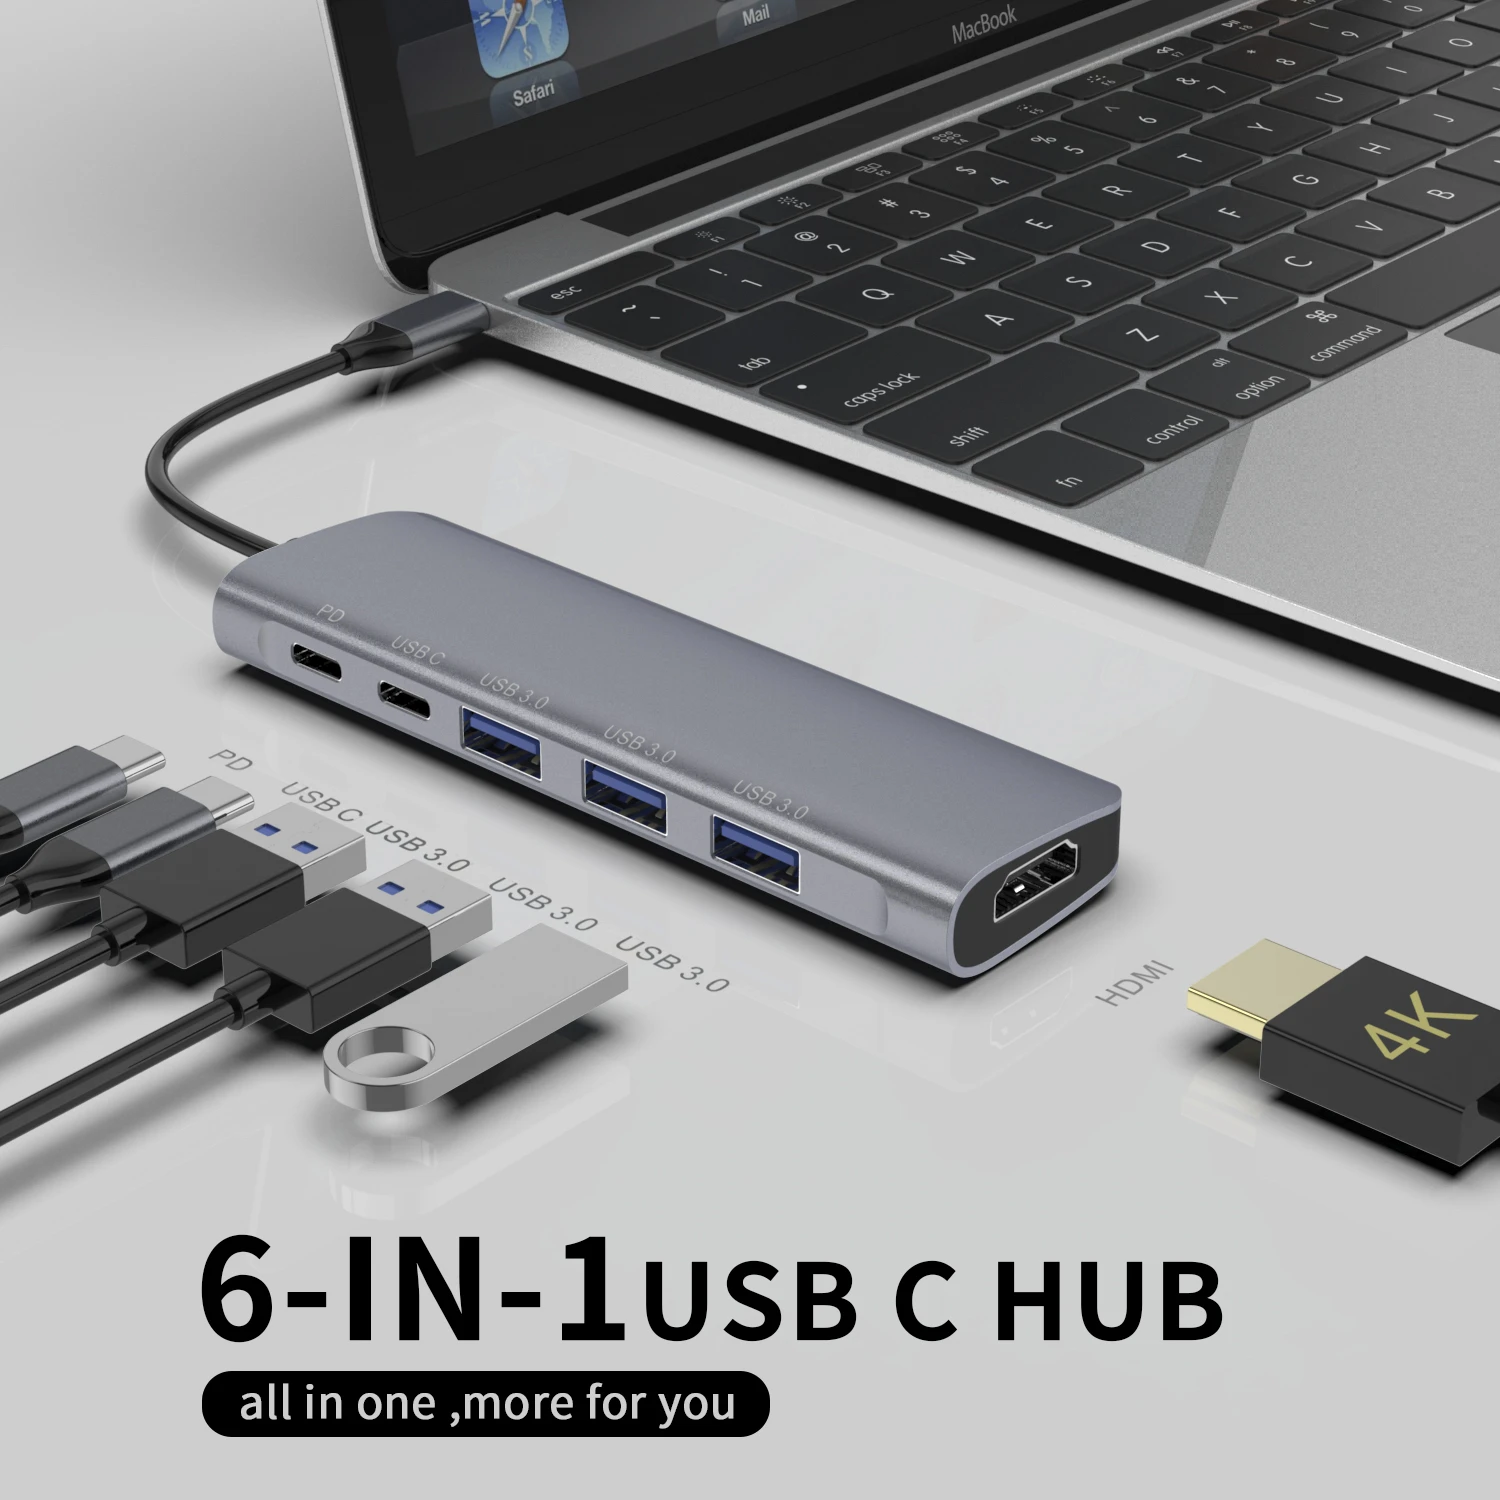 hot sale 6 in 1 USB Type C Hub 6 port 4K Multimedia Hub with 60W Power Delivery3.0 SD TF Card Reader and 2*USB3.0 Ports